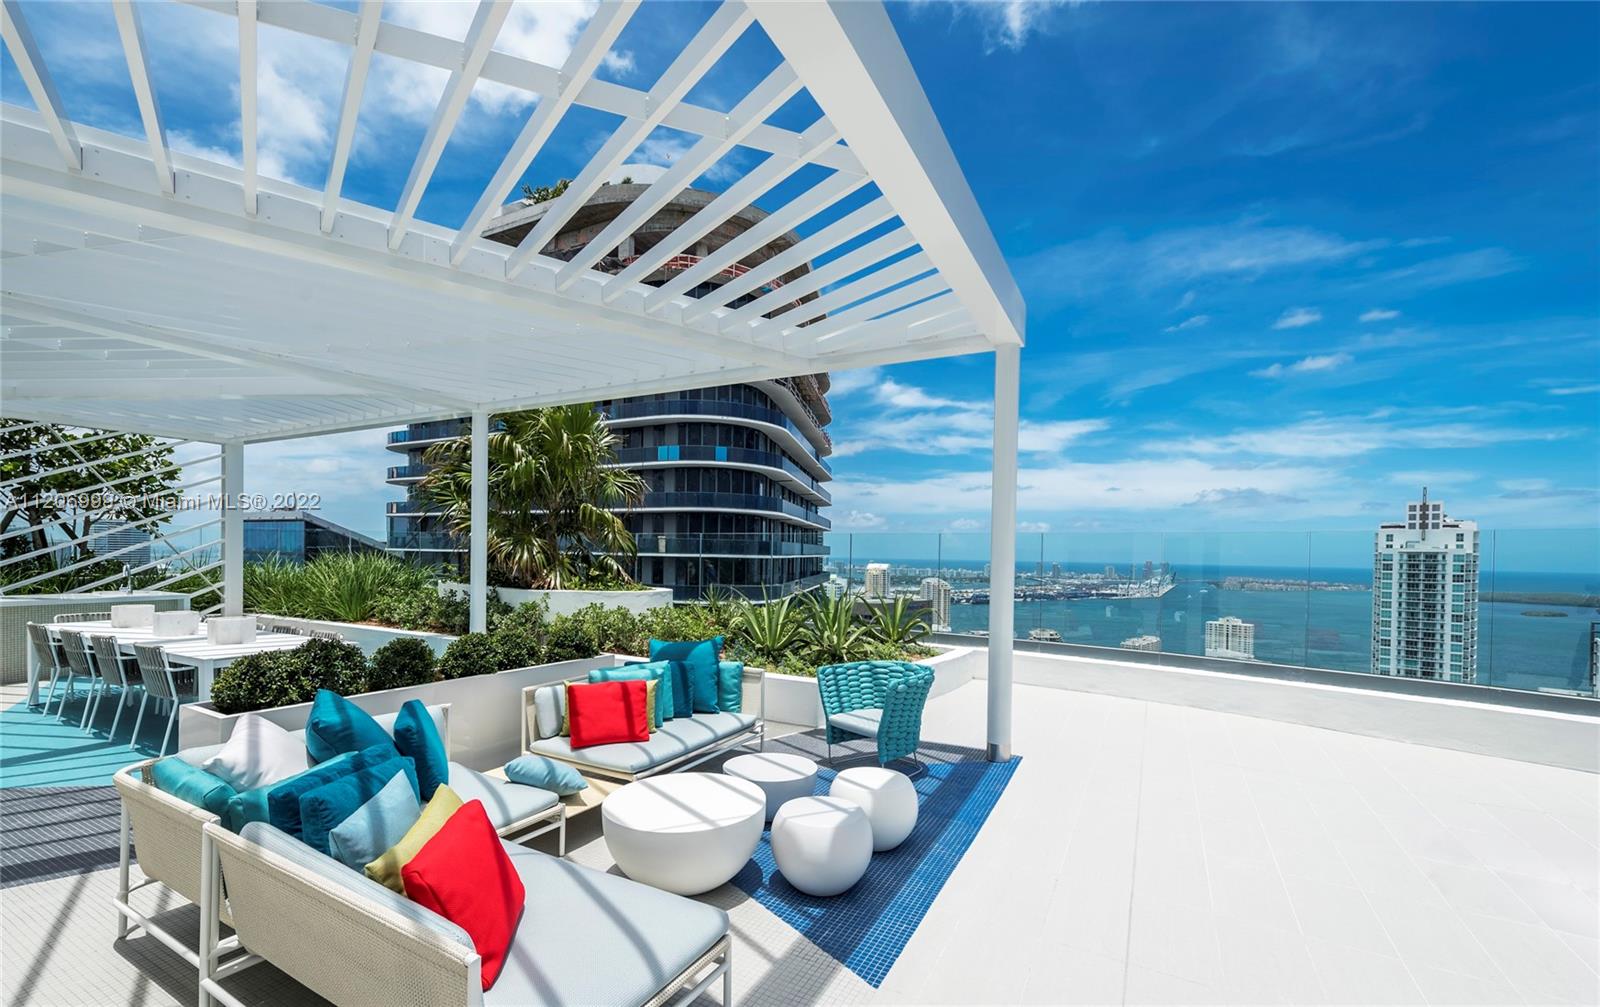 Beautiful Luxury 2 bed + Den / 2 Bath condo in the heart of Brickell with panoramic views of the Miami skyline, floor-to-ceiling high impact glass doors/windows, automated shades/window treatment, an open kitchen, imported stone counter-tops, contemporary European cabinetry. The wraparound balcony displays the great views that Brickell Heights has to offer. Within walking distance to Live music, restaurants, Work and lots of Fun. Enjoy the upscale amenities Valet Parking, Roof Top Pool, A three-story equinox fitness club with spa and much more. This unit has is an all around gem.